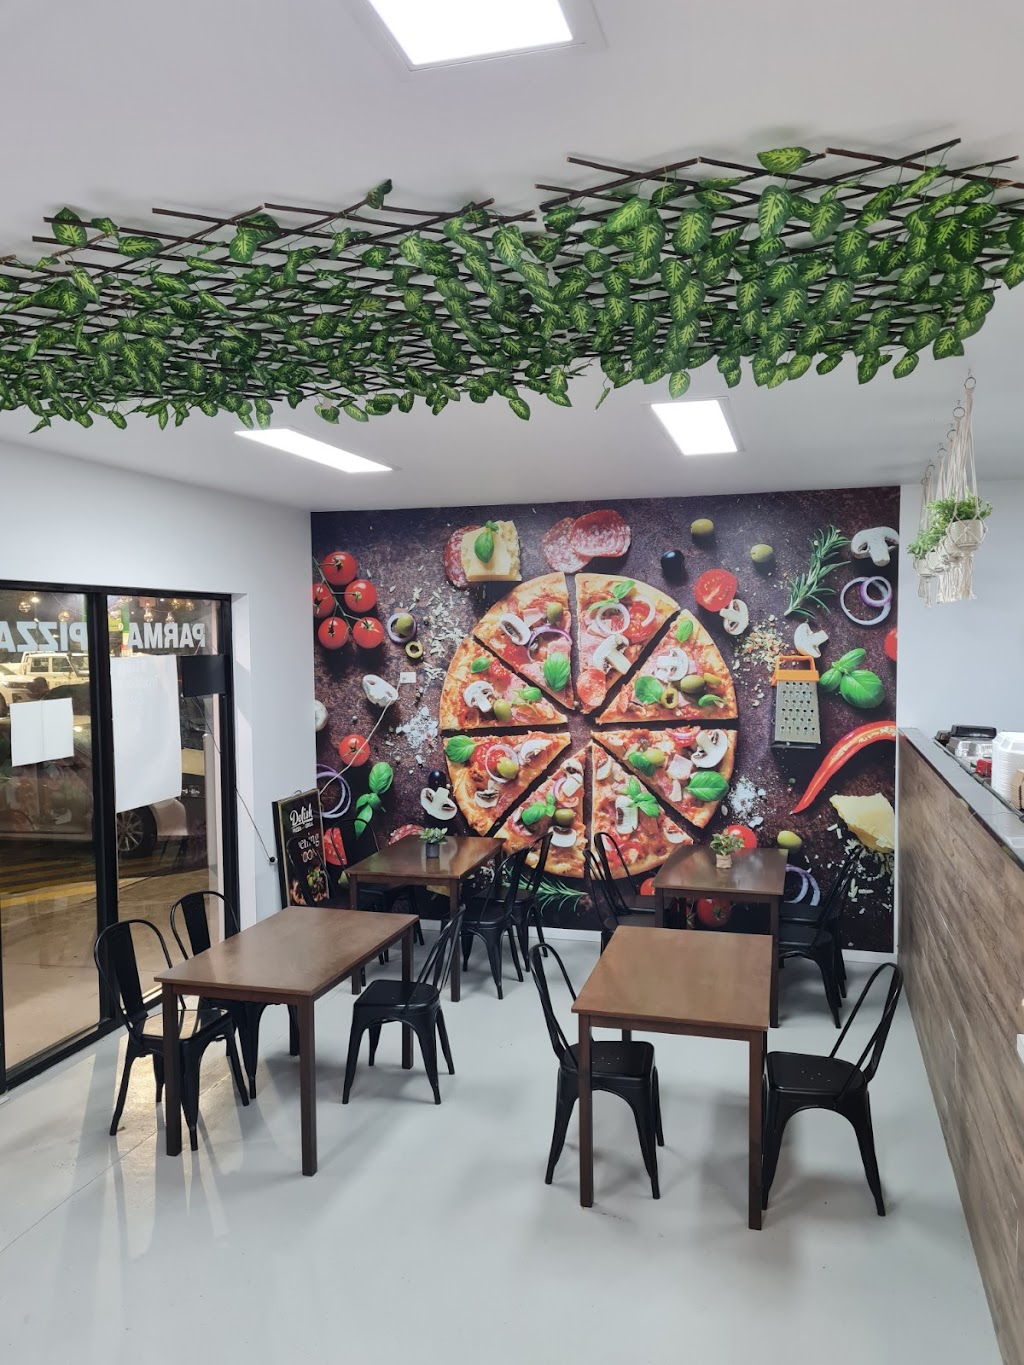 Delish Pizza And Grill | 316 Glenelg Hwy, Smythes Creek VIC 3351, Australia | Phone: 0413 083 925